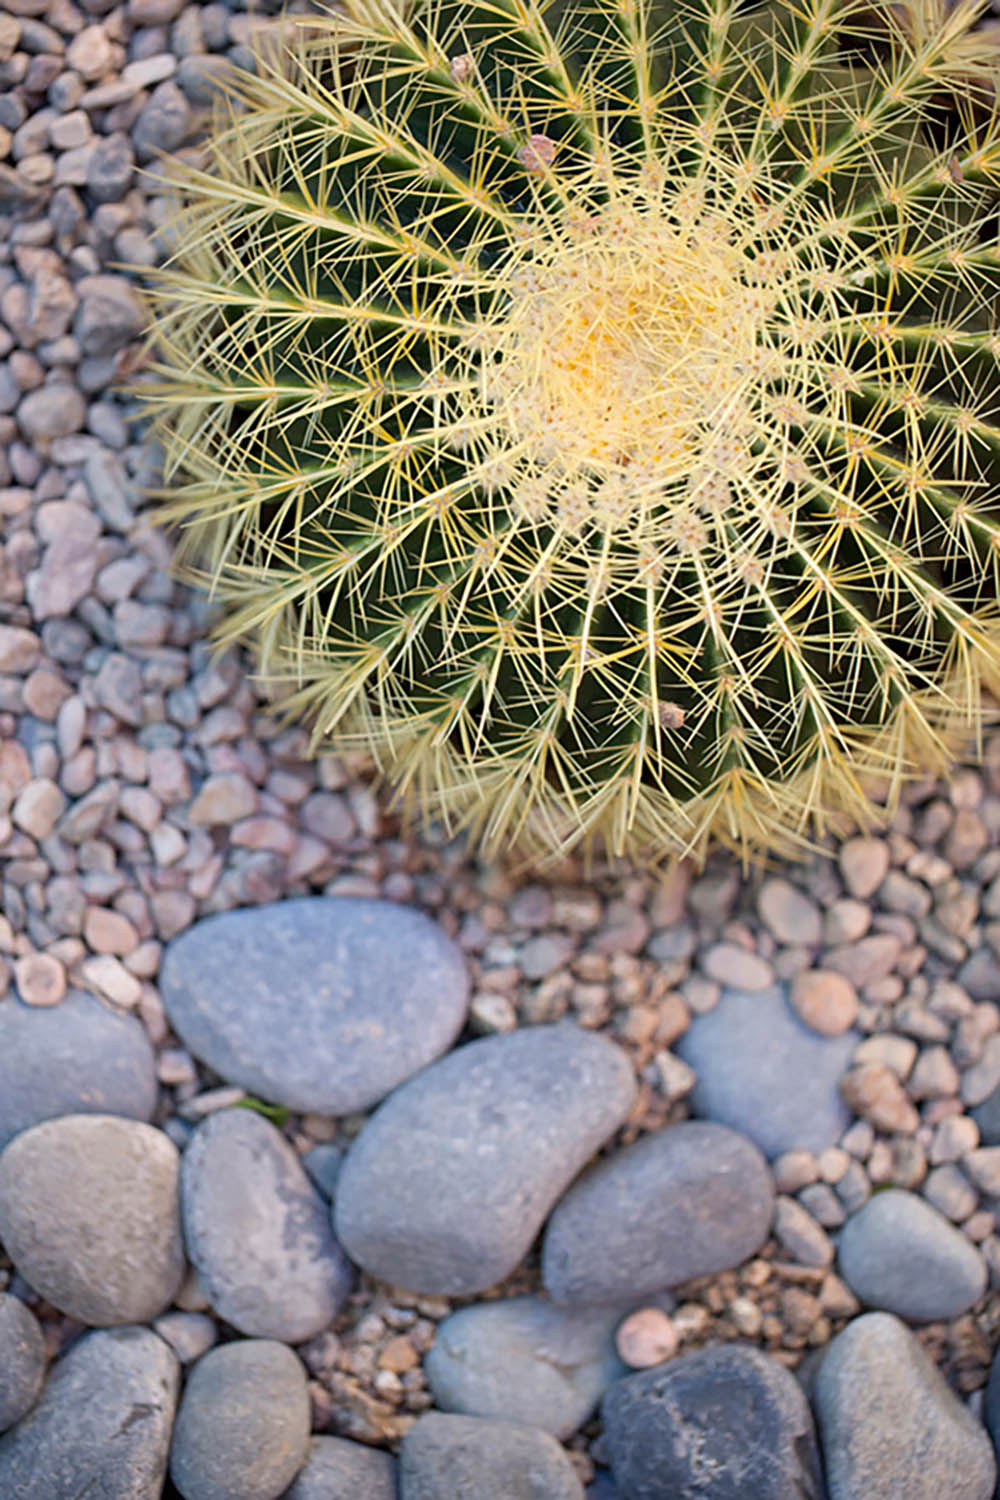 A cactus sitting on pea gravel and Mexican beach pebbles.